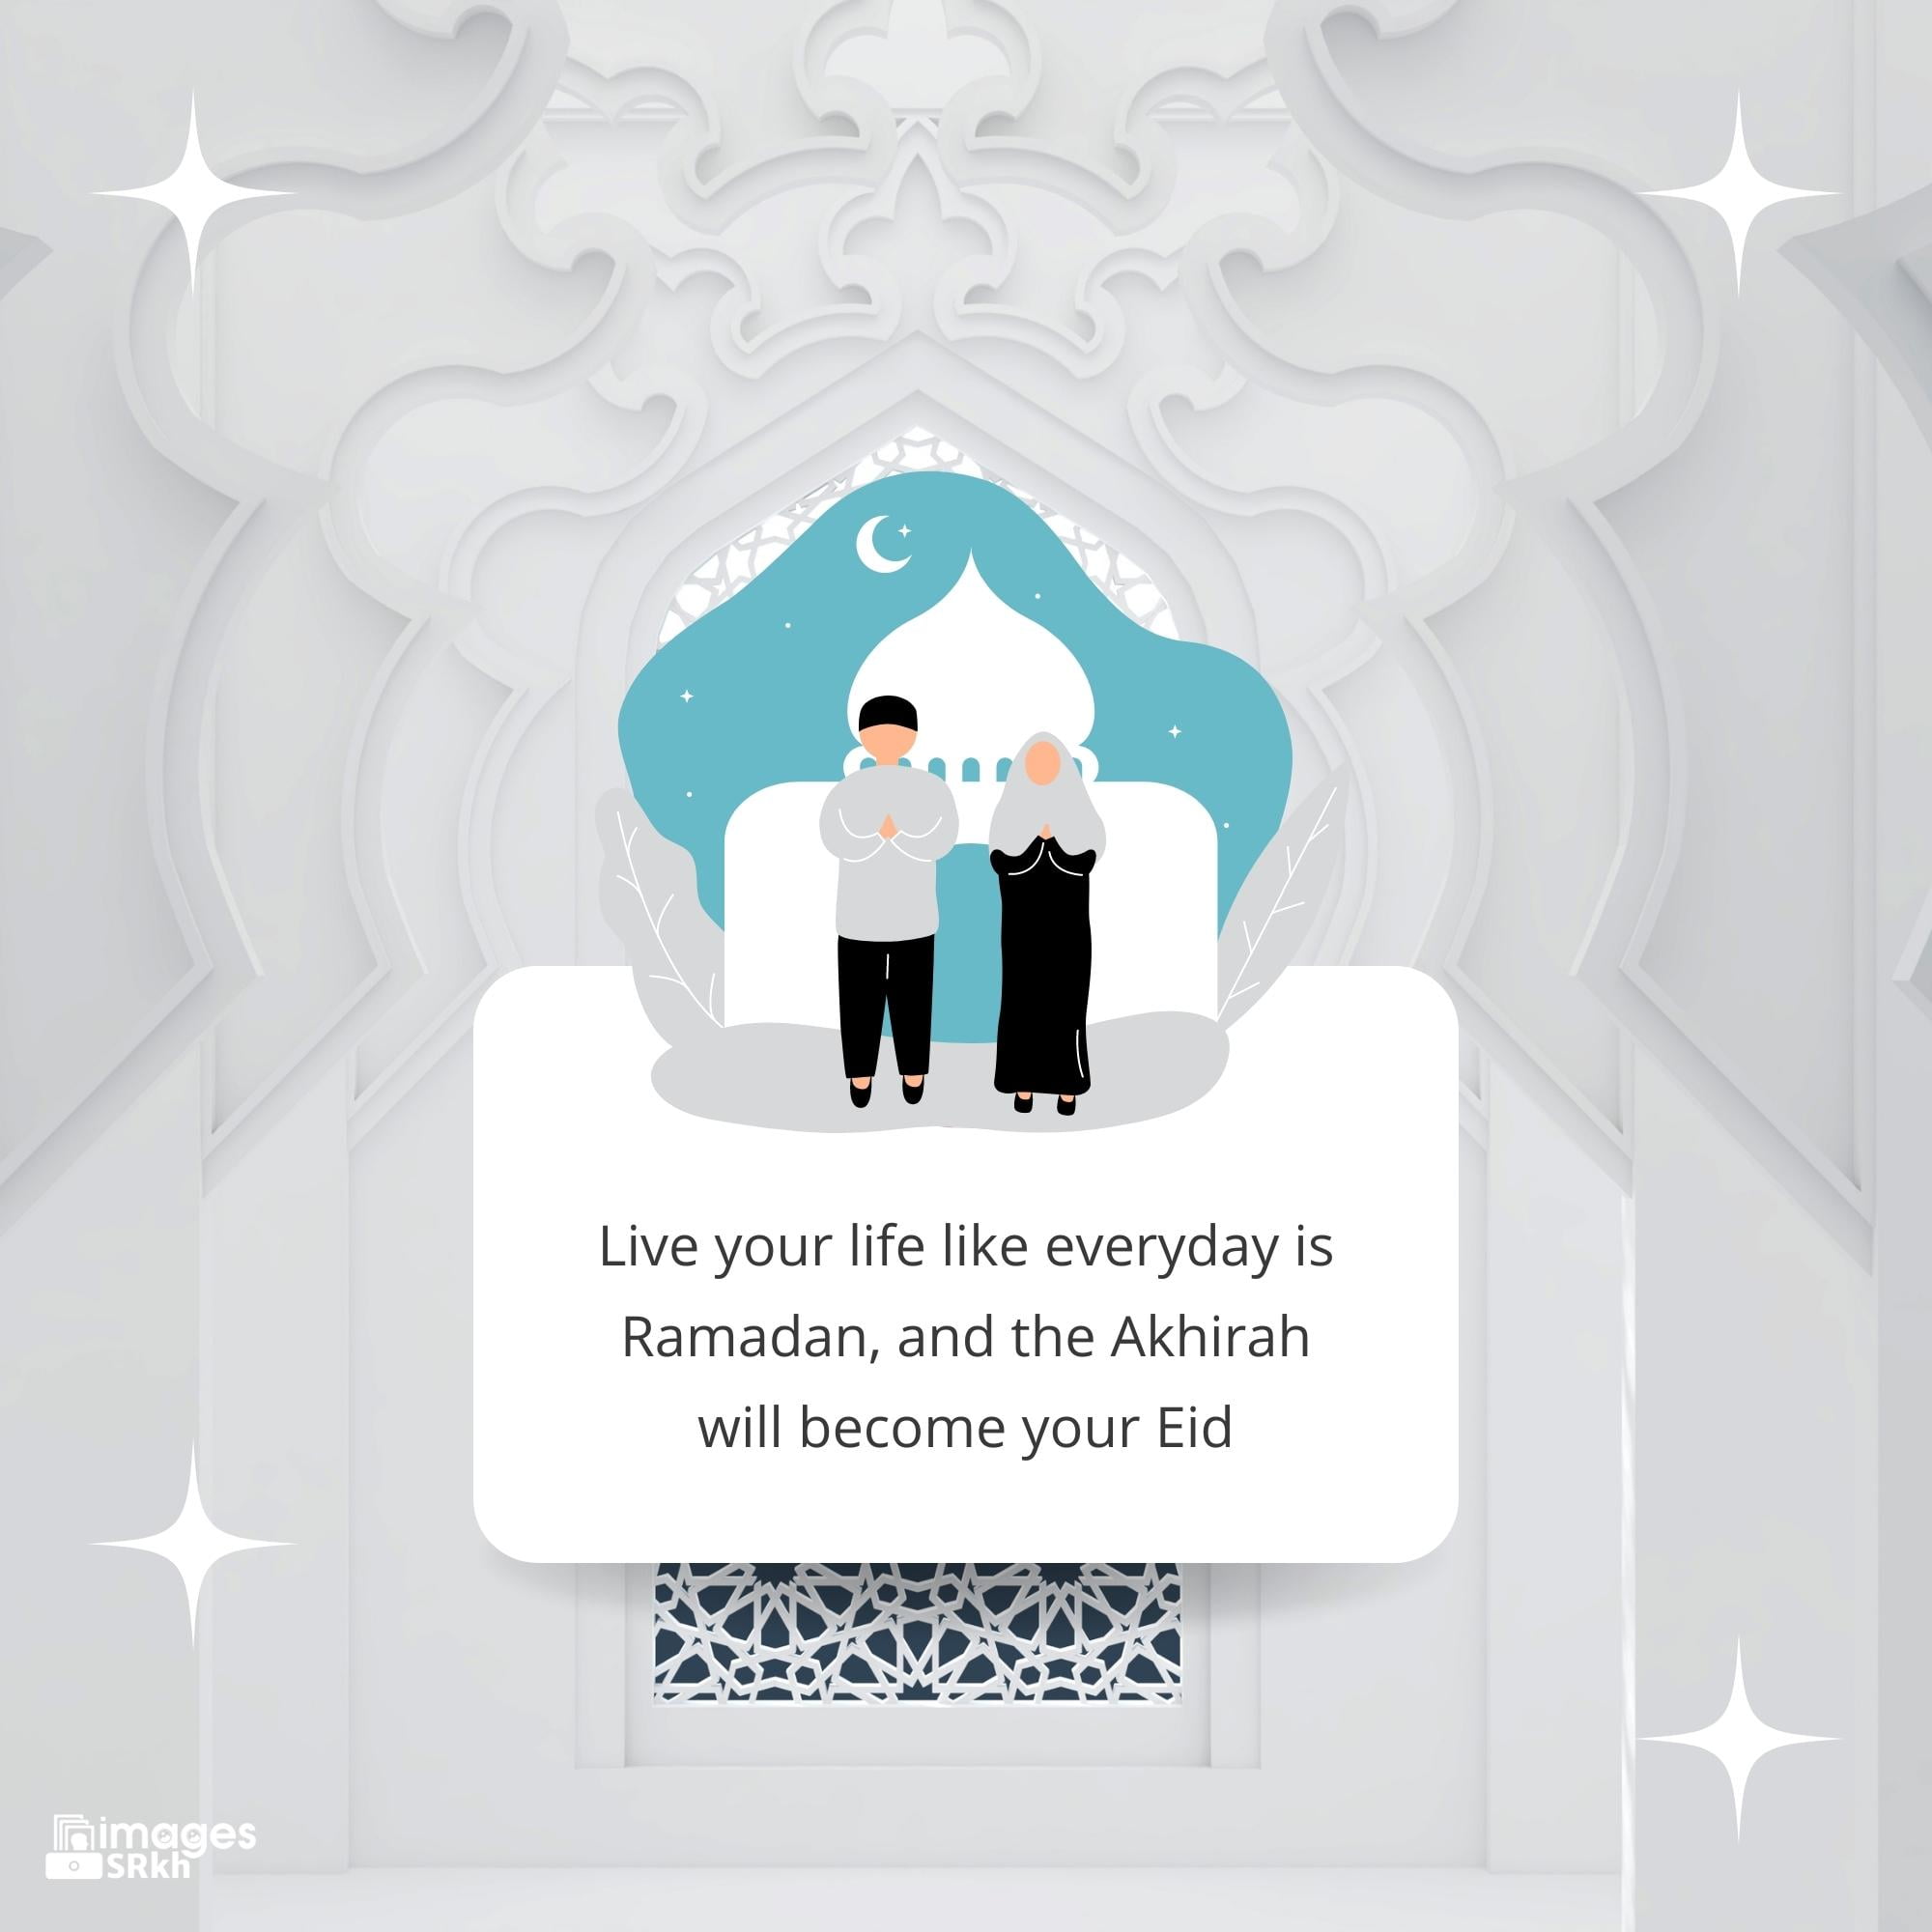 Quotes For Eid Mubarak | Download free in Hd Quality | imagesSRkh